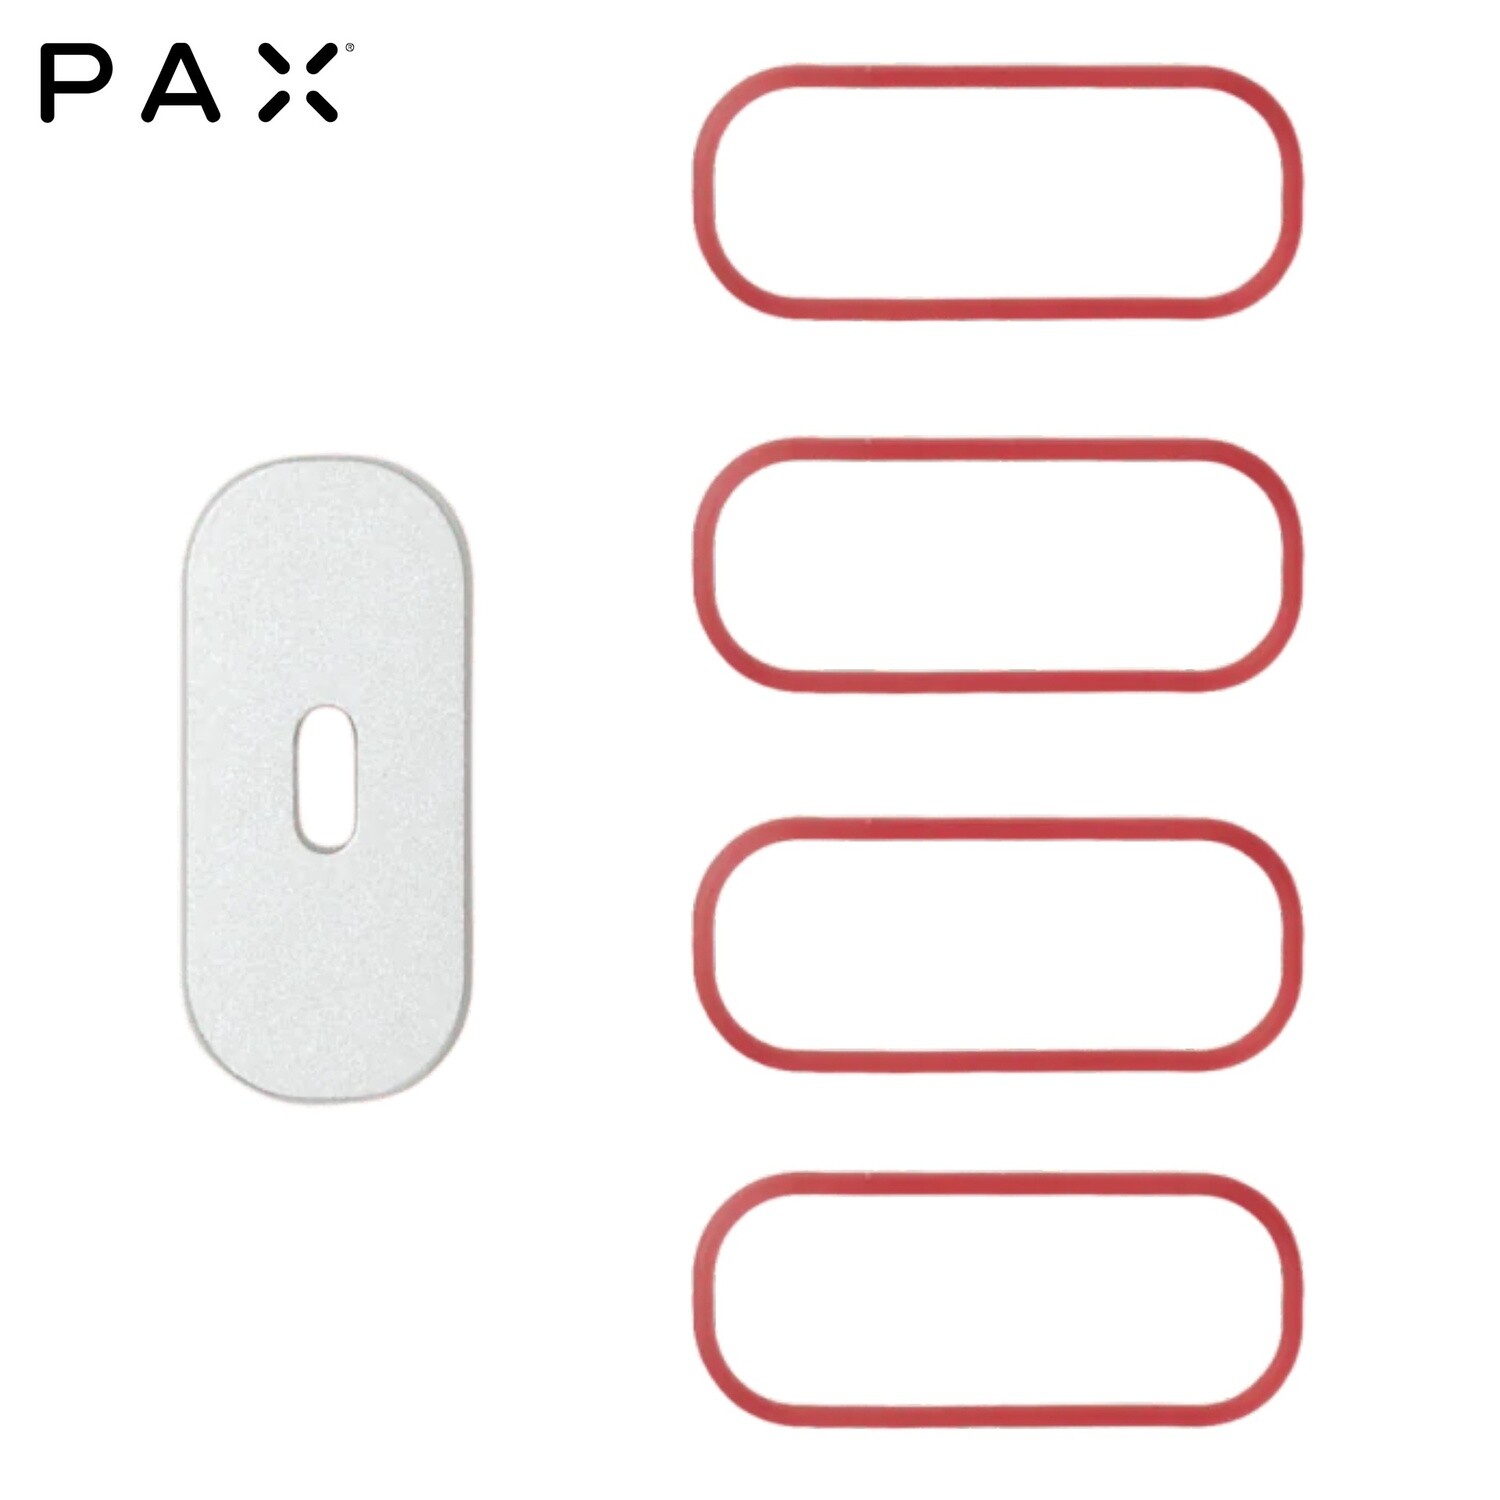 PAX® Concentrate Insert Replacement Lid & O-Rings